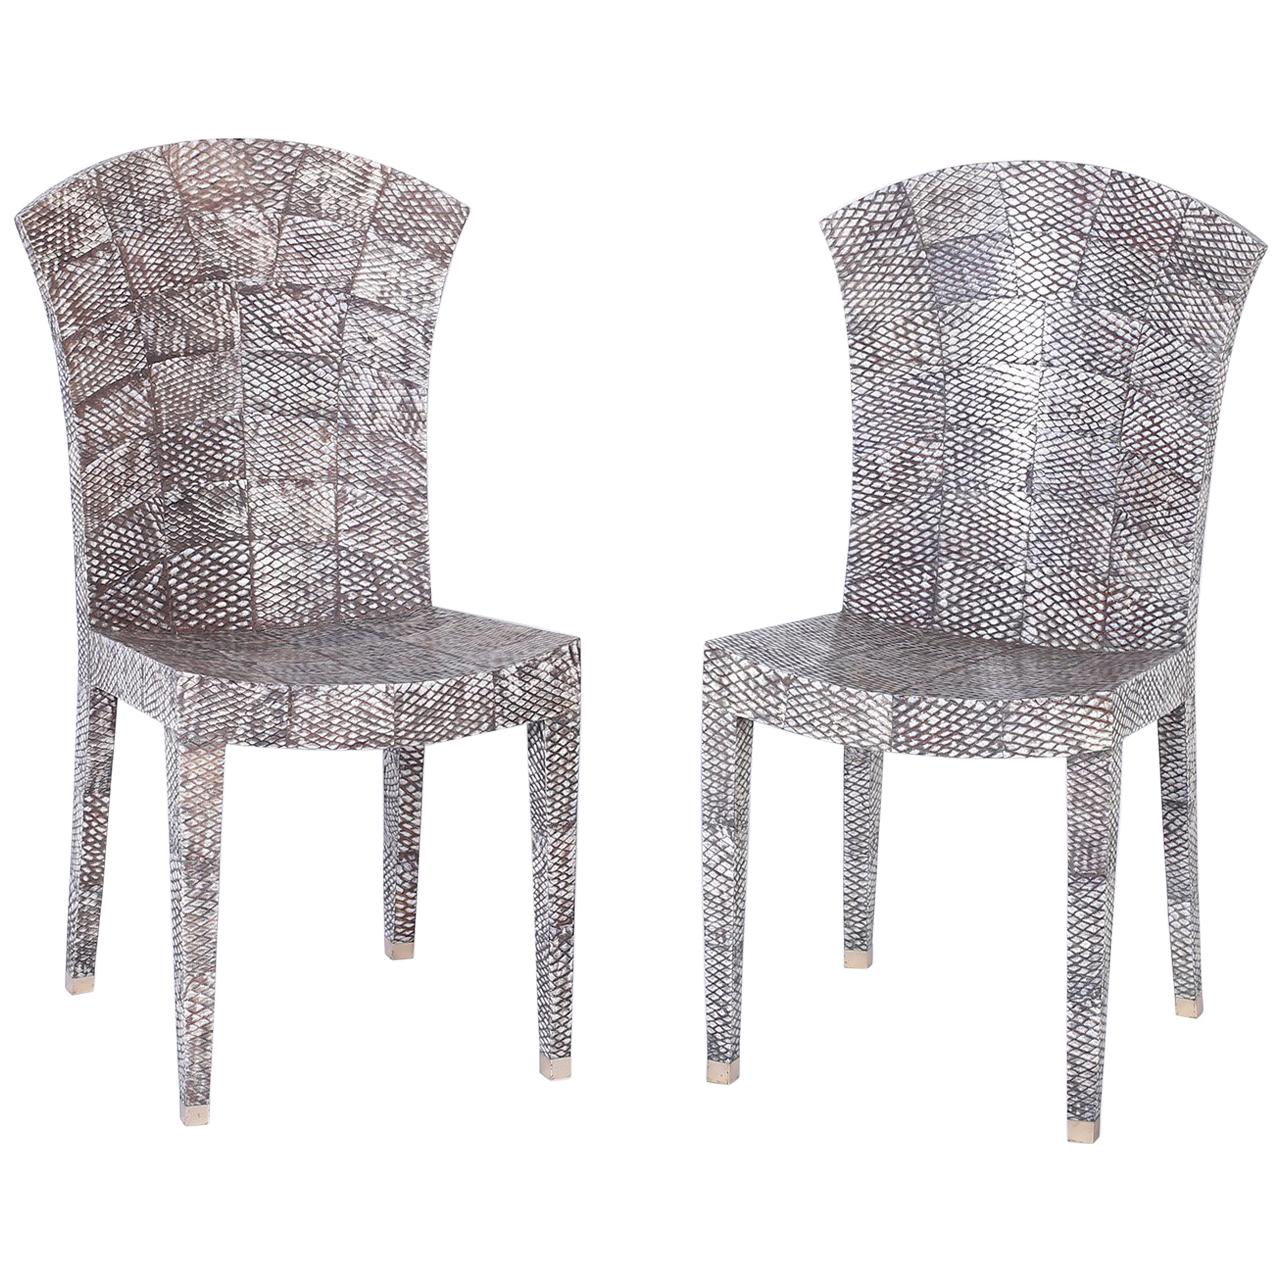 Pair of Midcentury Shagreen Covered Dining Chairs